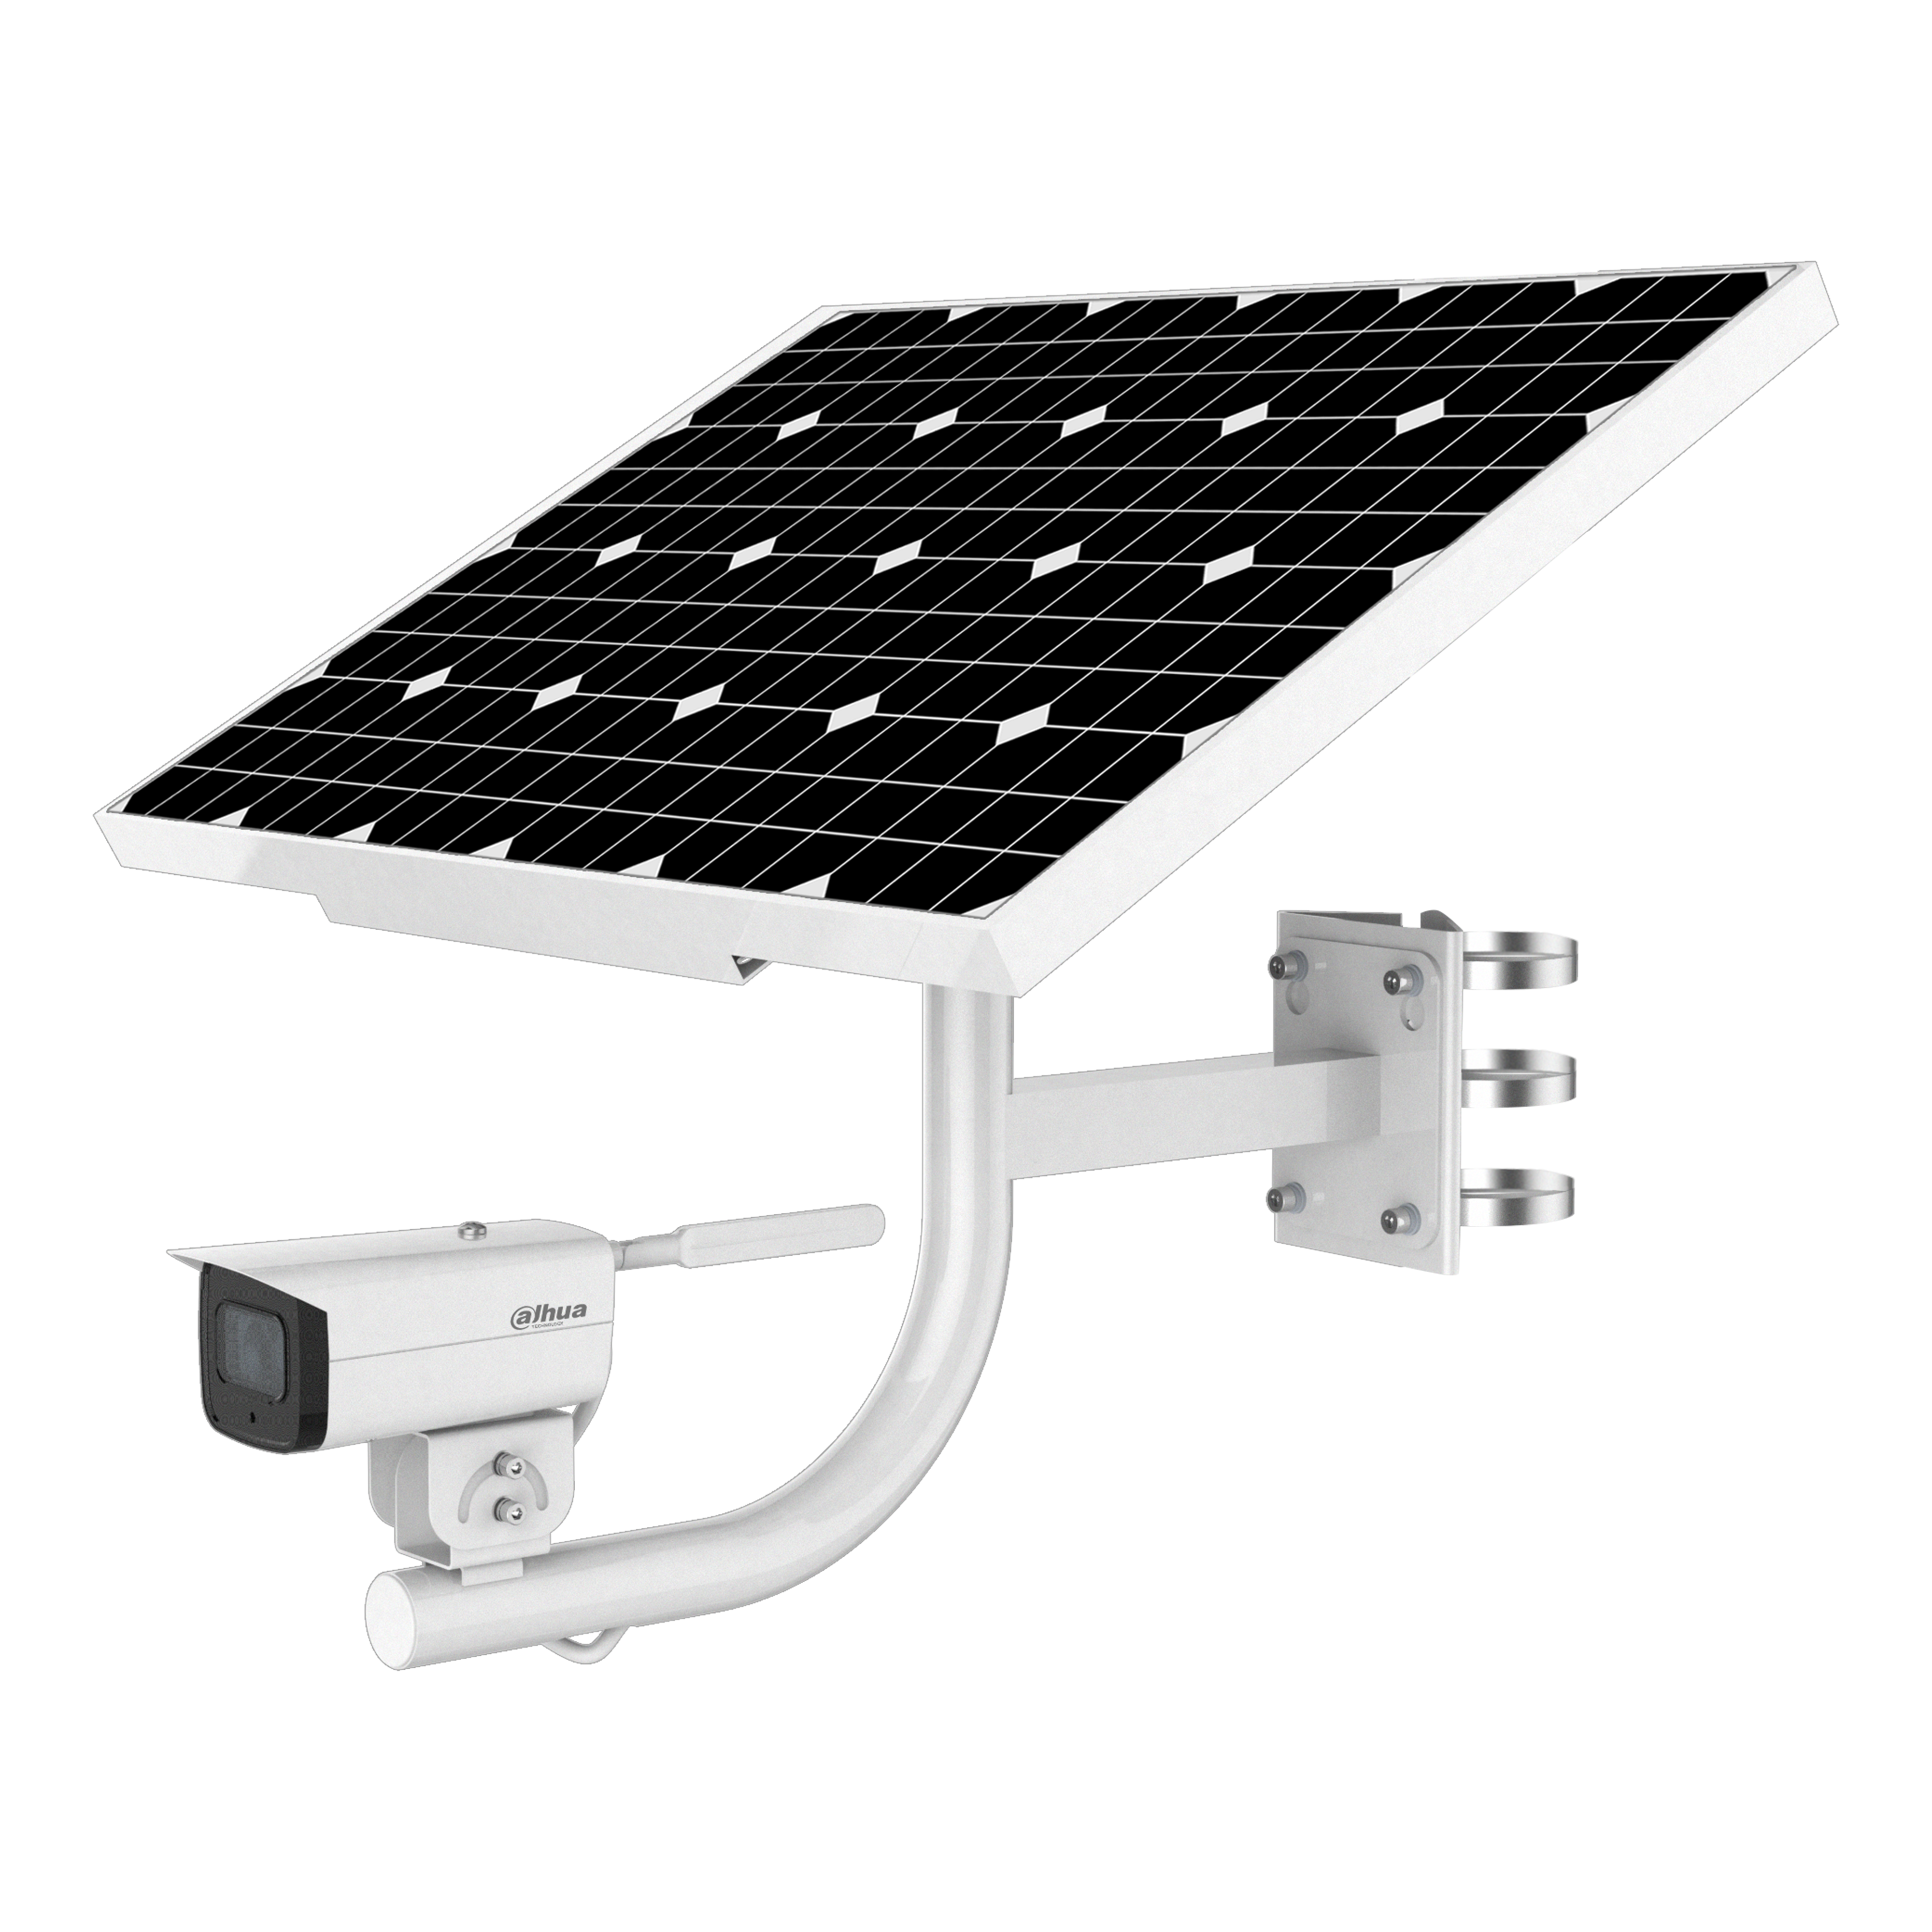 KIT/DH-PFM378-B60-W/DH-IPC-HFW - Dahua - Integrated Solar Power System (without Lithium Battery) - 0